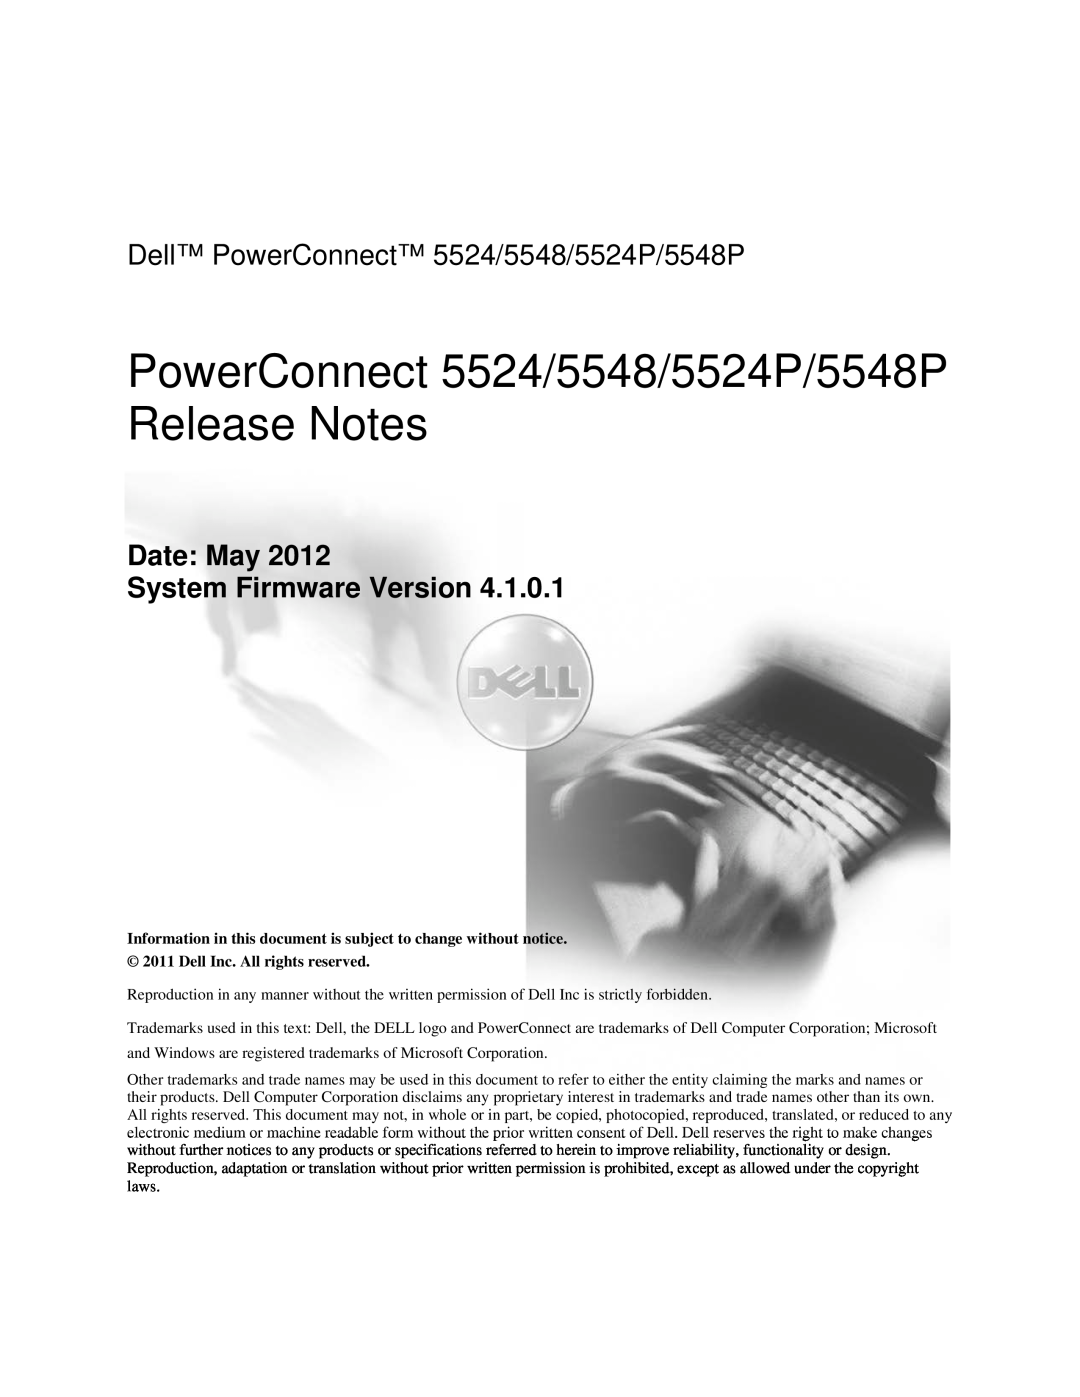 Dell specifications PowerConnect 5524/5548/5524P/5548P Release Notes, Dell PowerConnect 5524/5548/5524P/5548P 